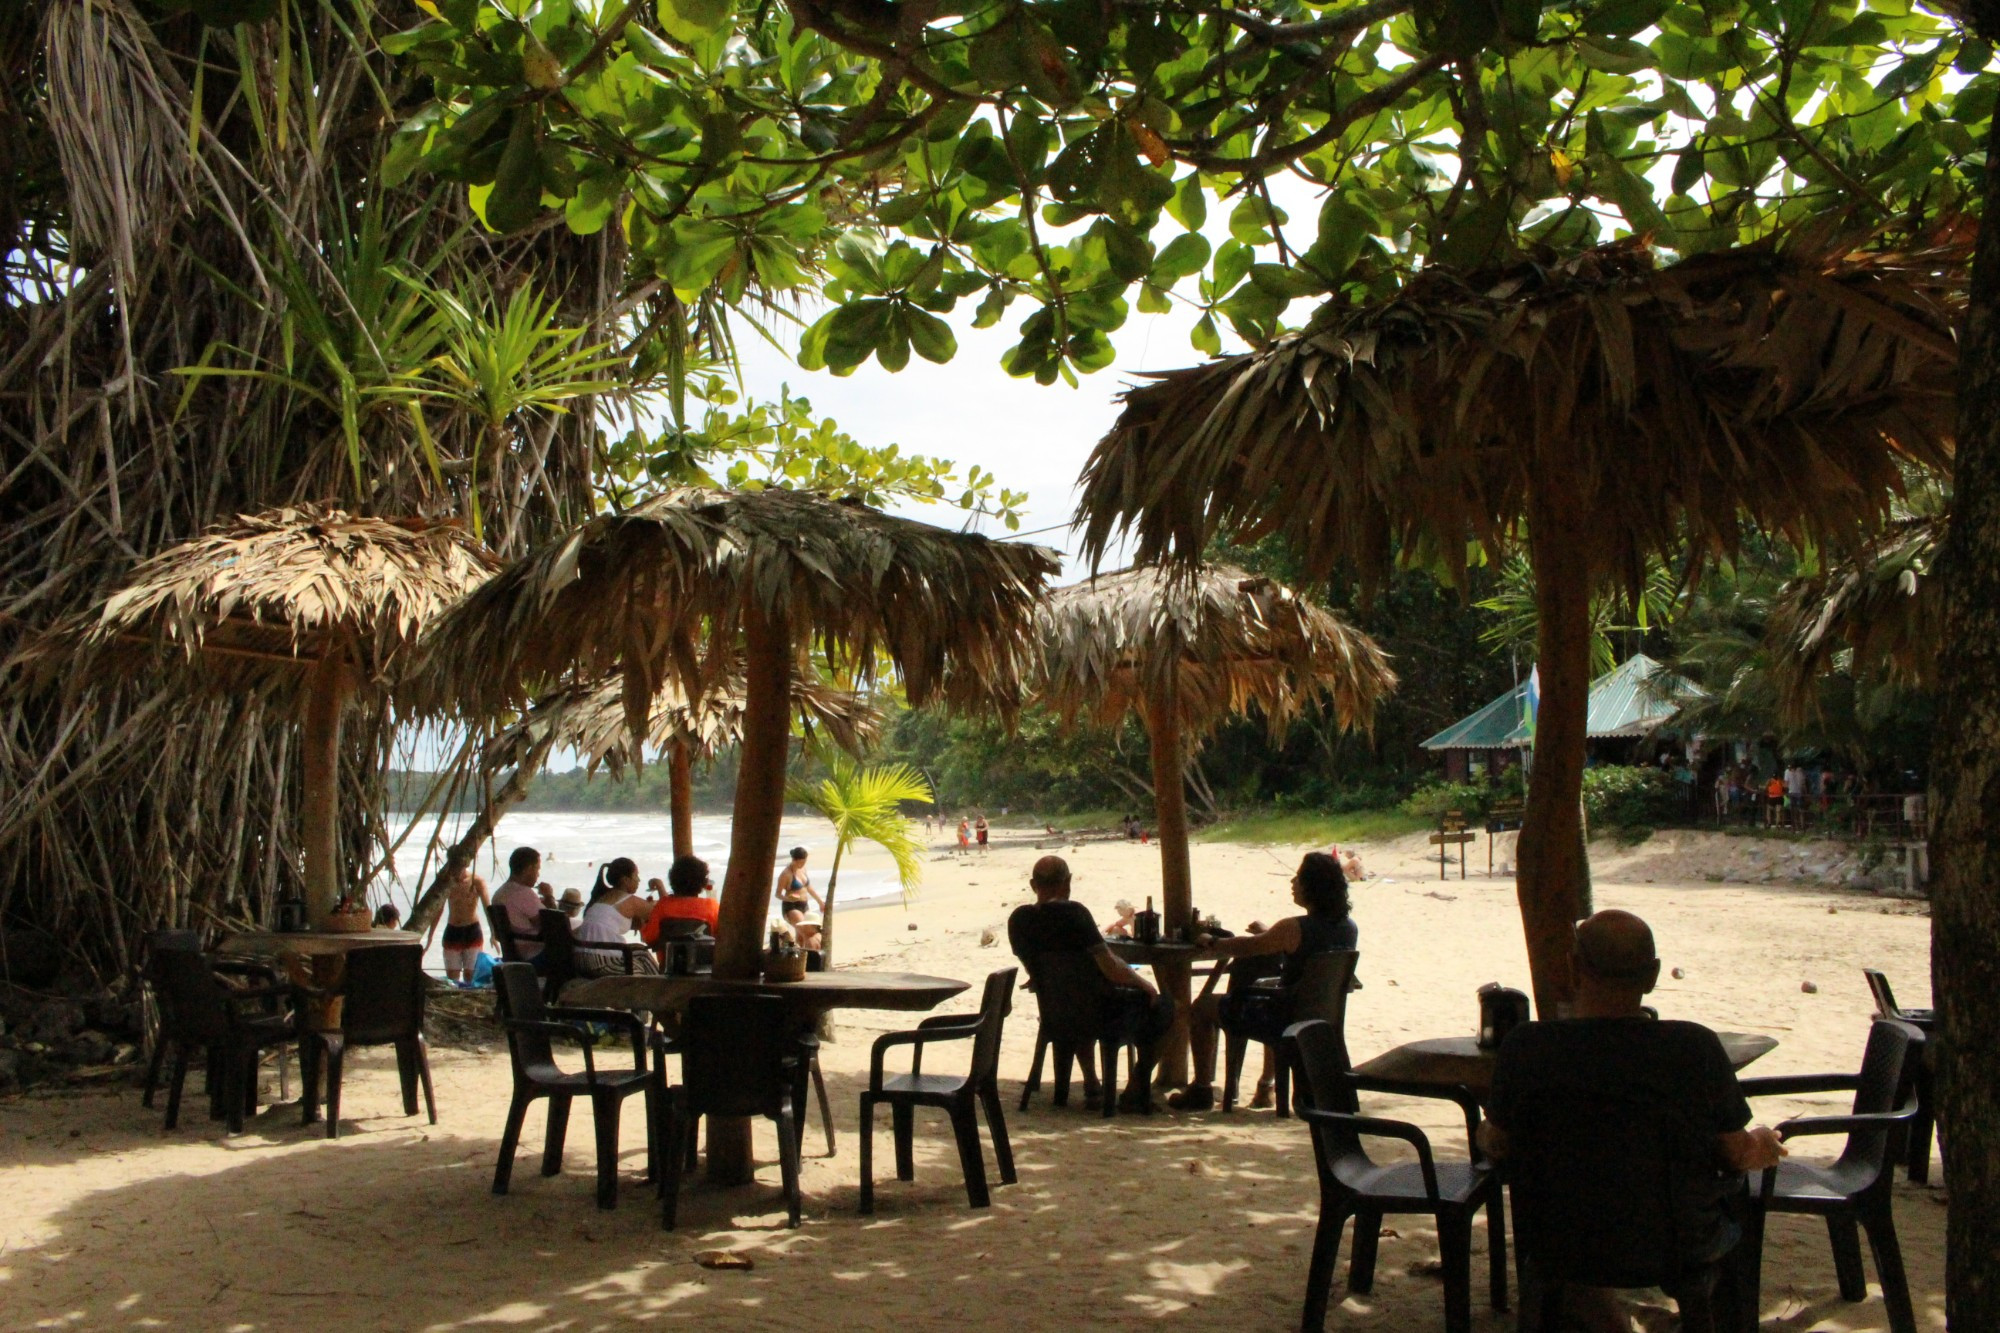 Restaurant at the entrance to the Cahuita National Park